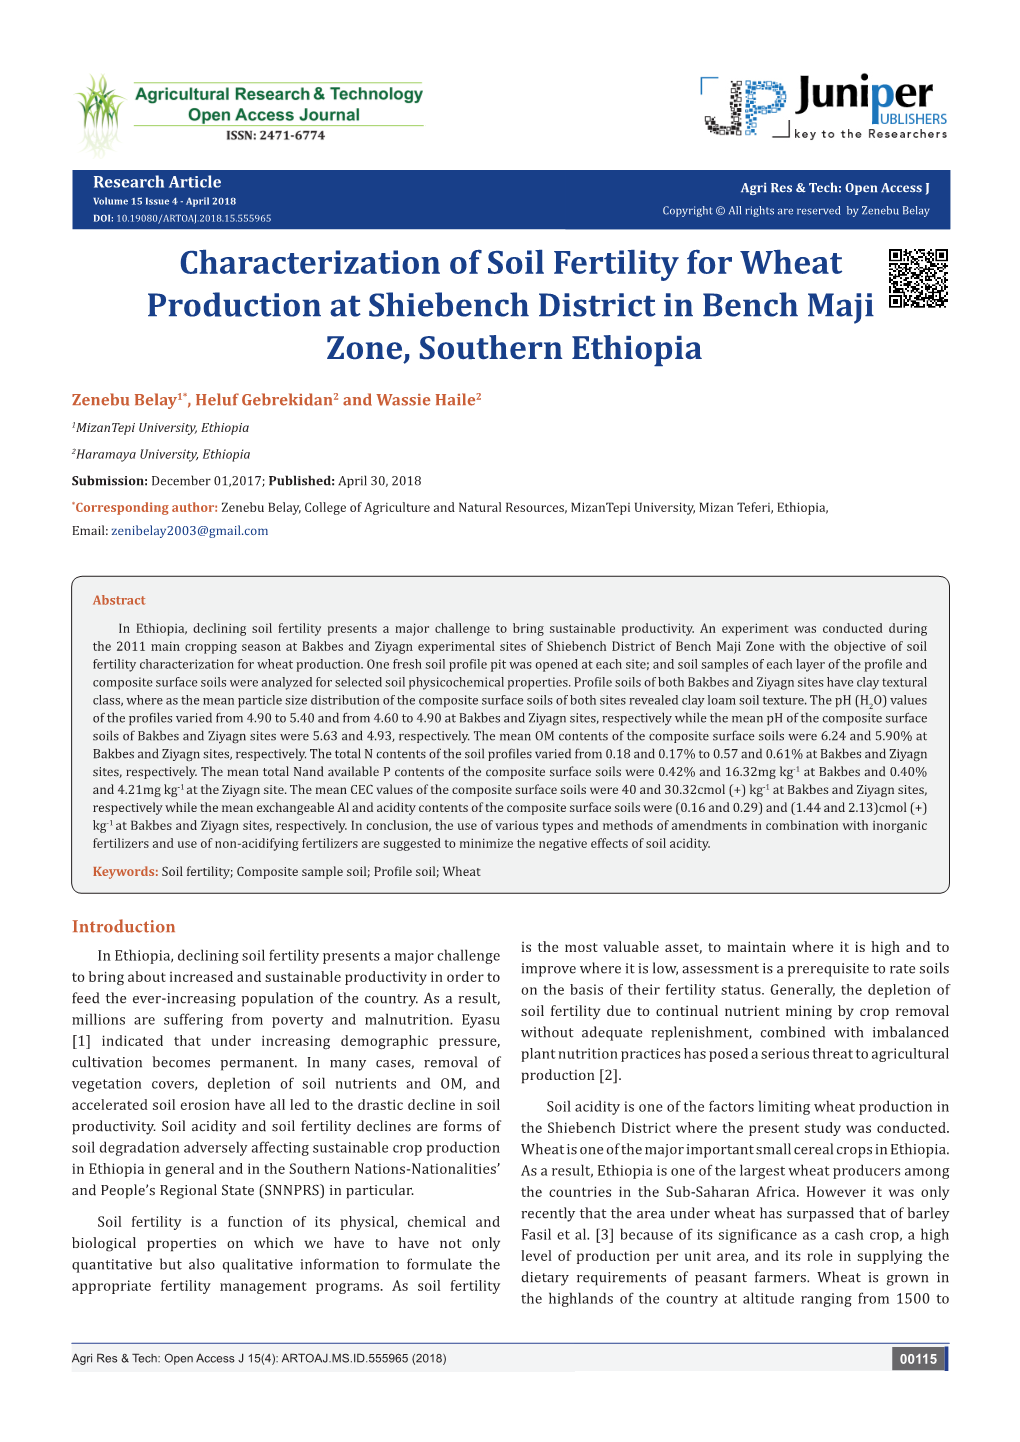 Characterization of Soil Fertility for Wheat Production at Shiebench District in Bench Maji Zone, Southern Ethiopia